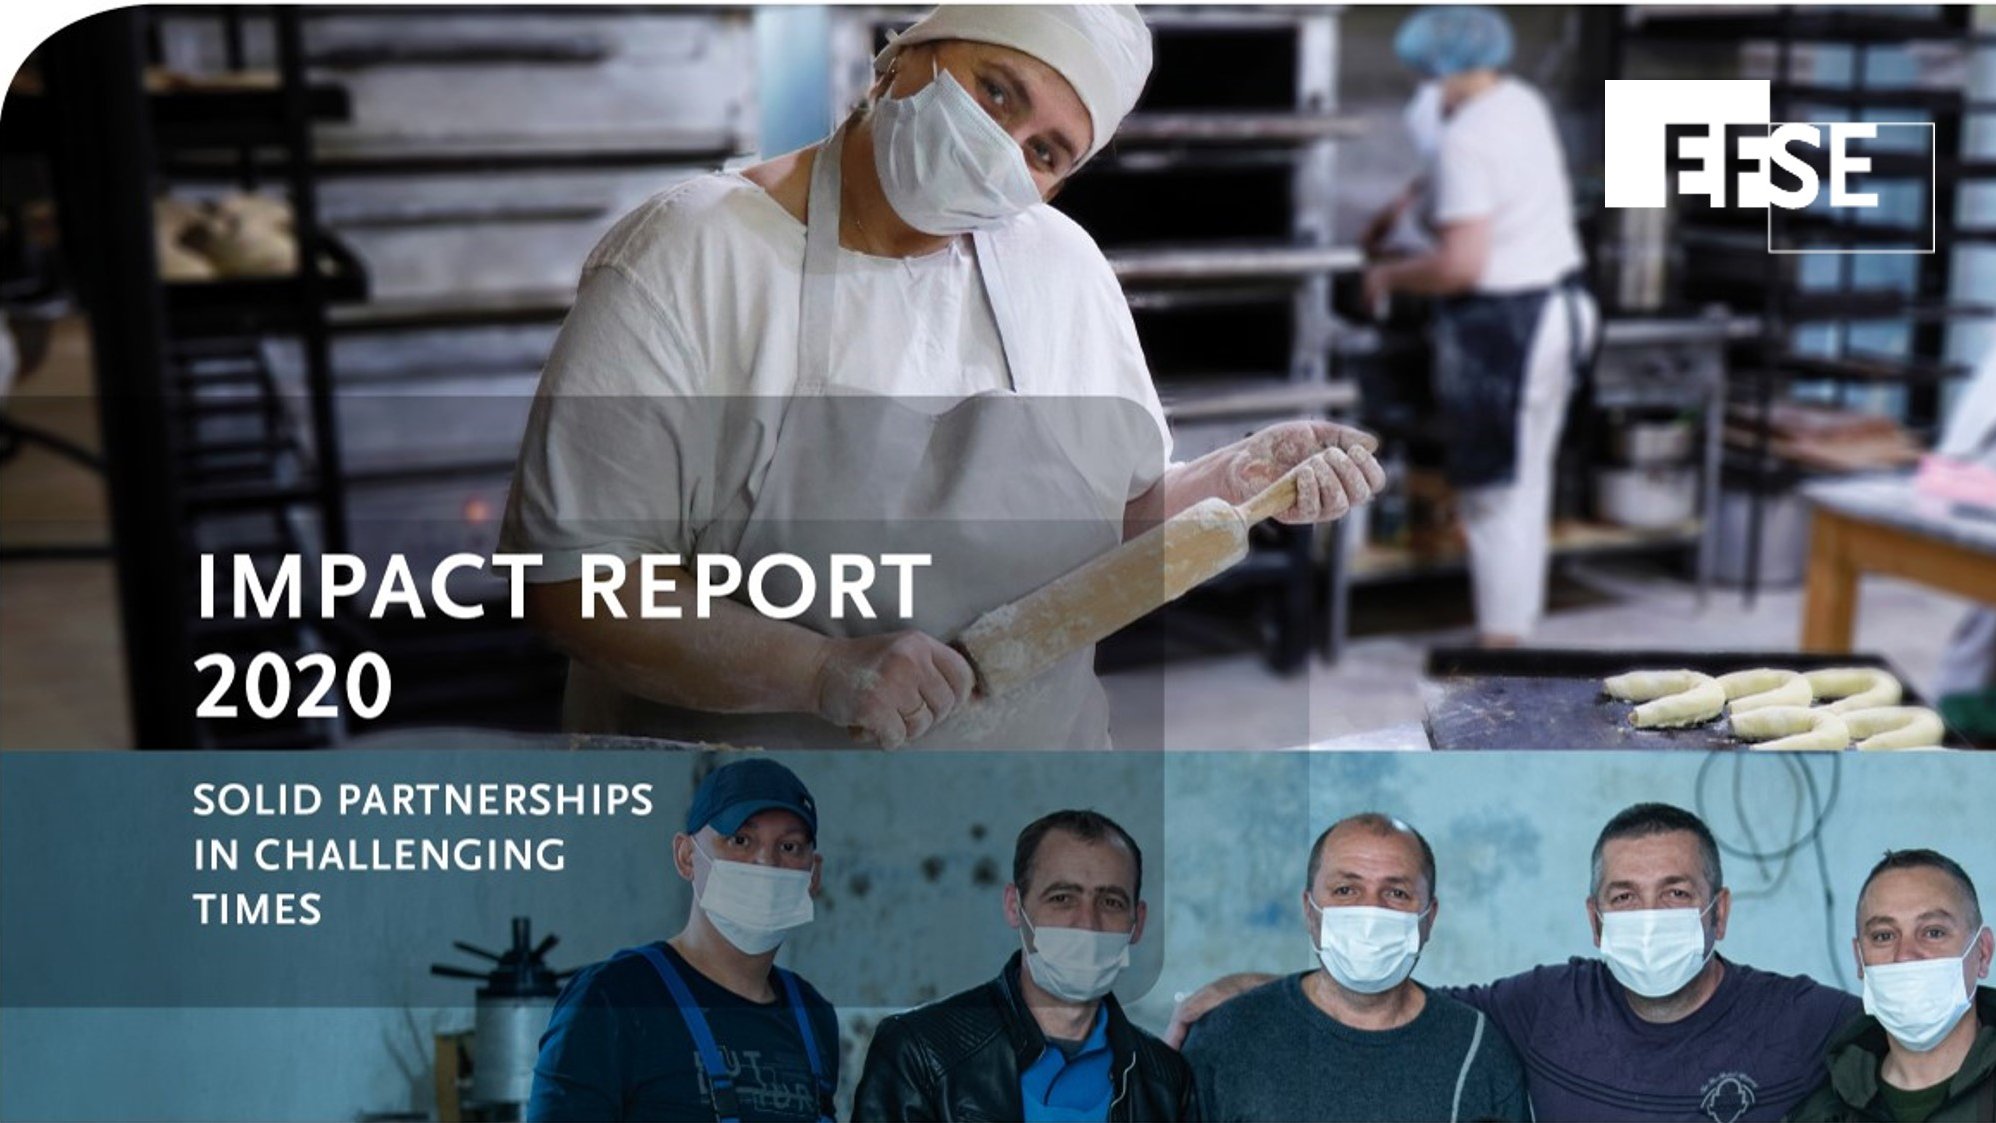 Cover of EFSE Impact Report shows baker and shoemaker at work along with the title of the report: Solid Partnerships in Challenging Times